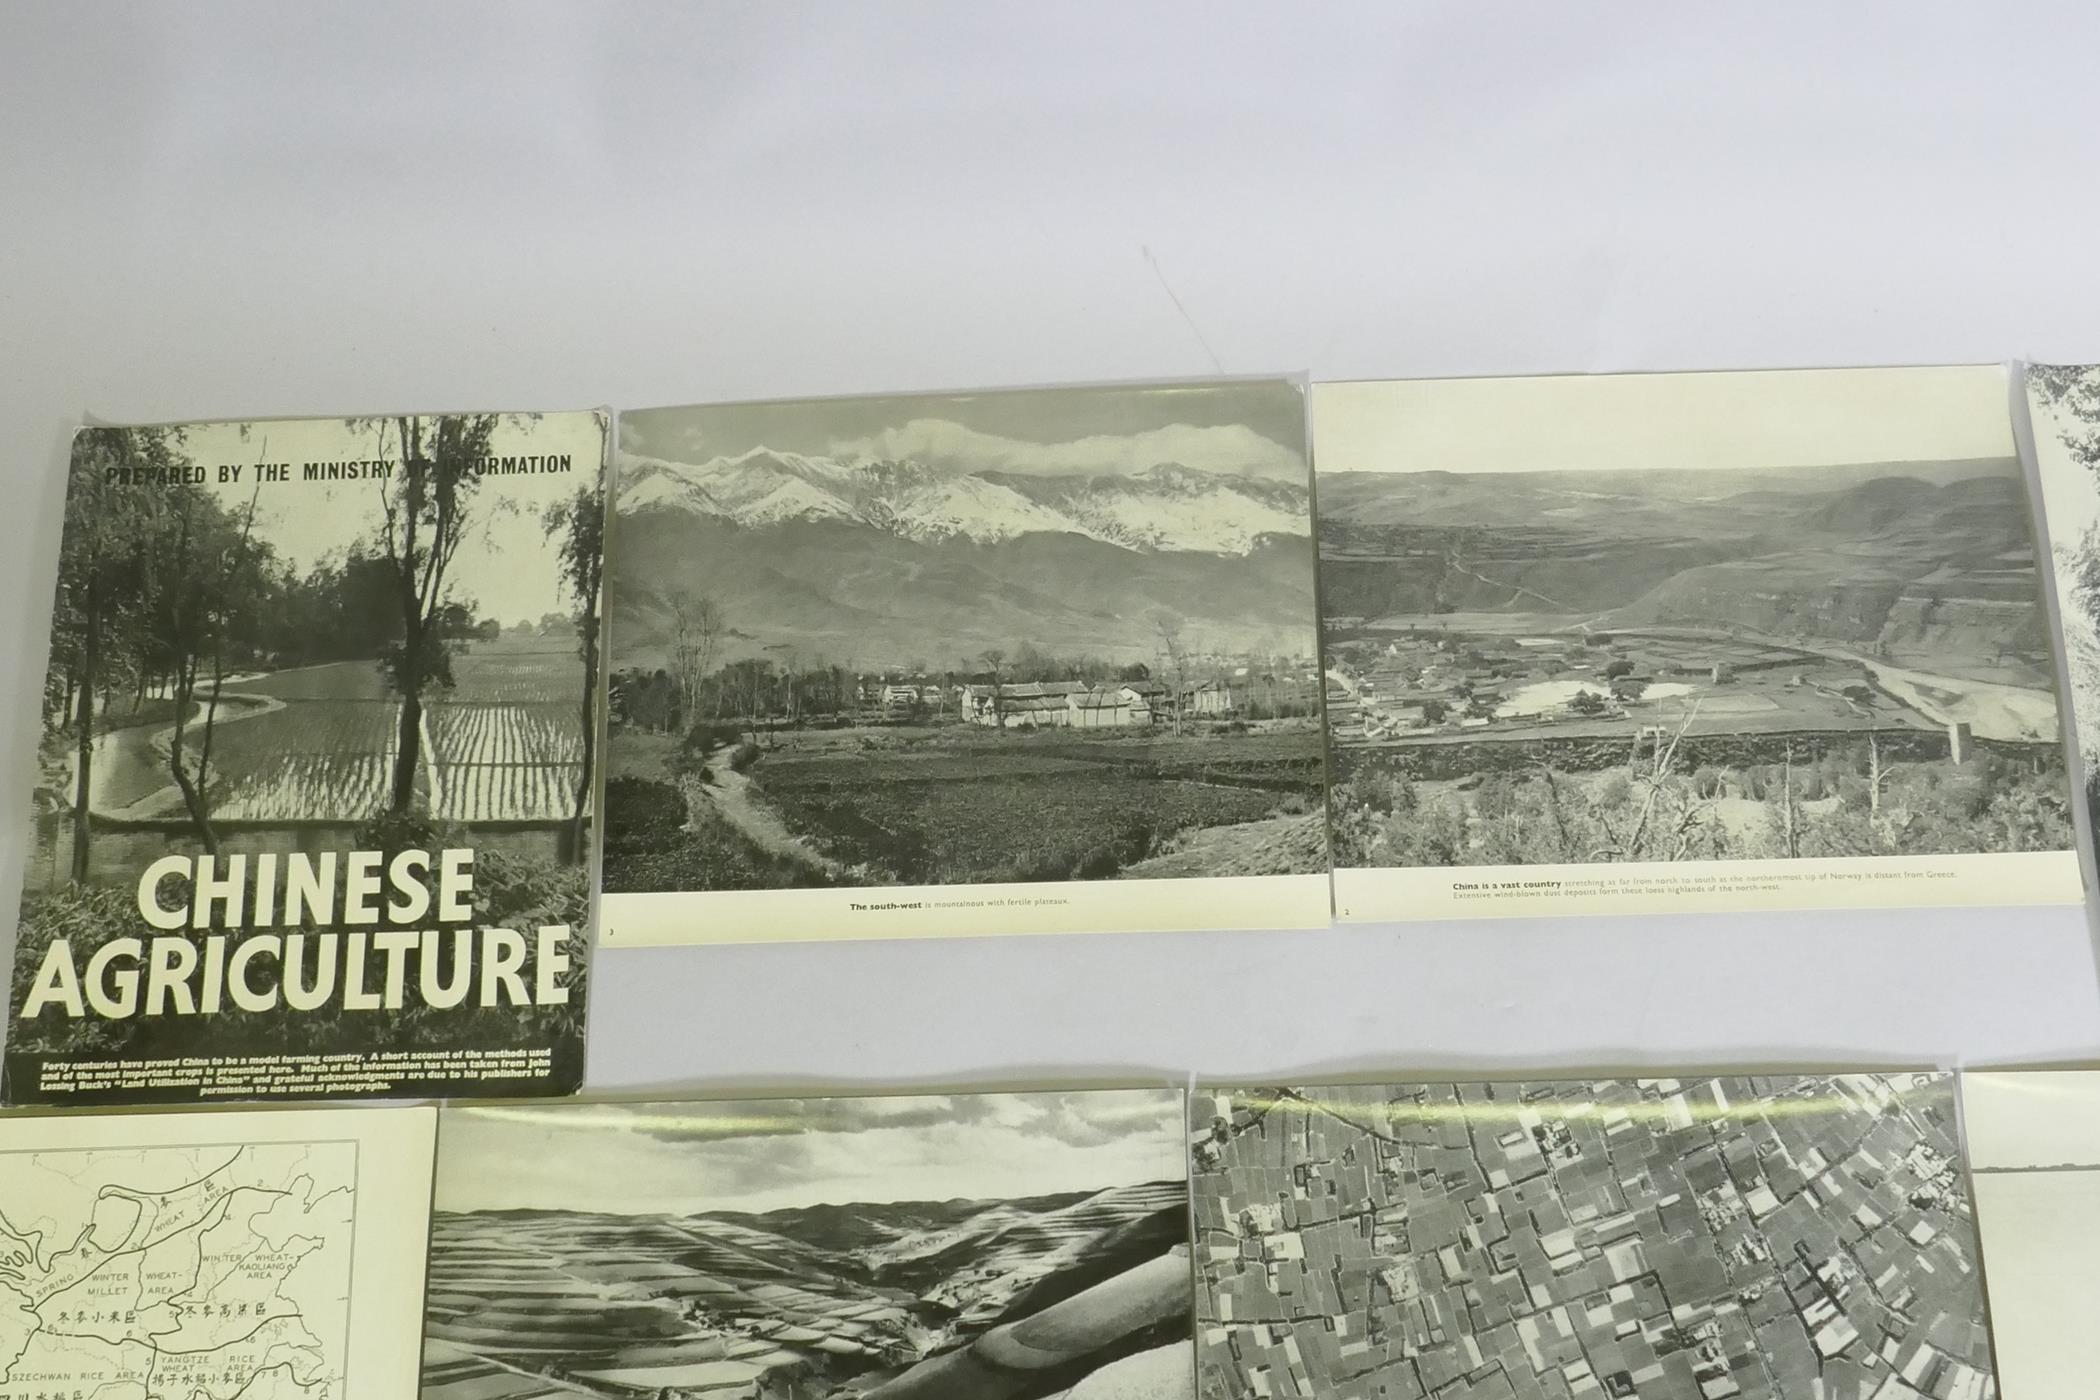 A series of photographic informational prints on Chinese agriculture, produced by the Ministry of - Image 2 of 9